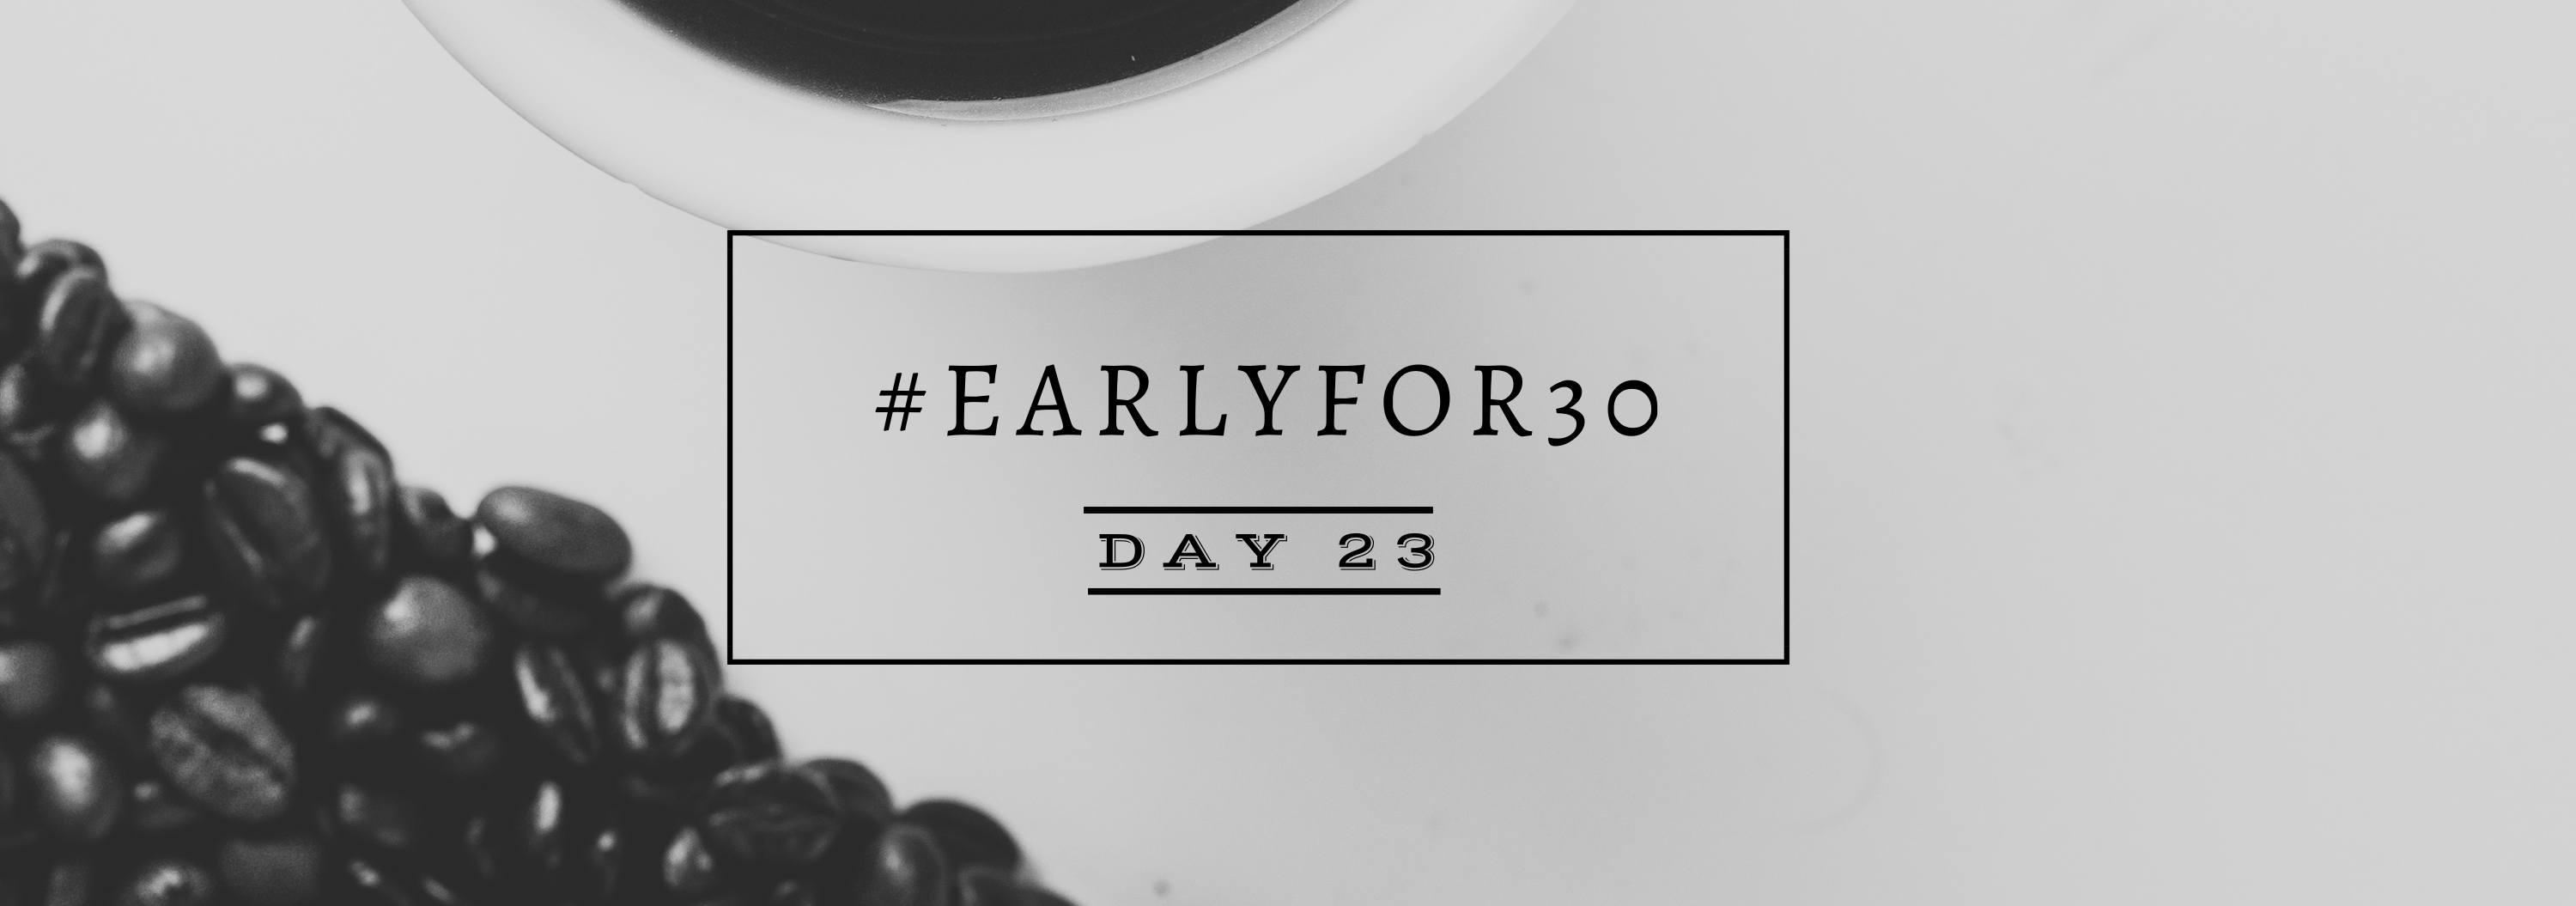 Day 23 Early for 30 Days Challenge